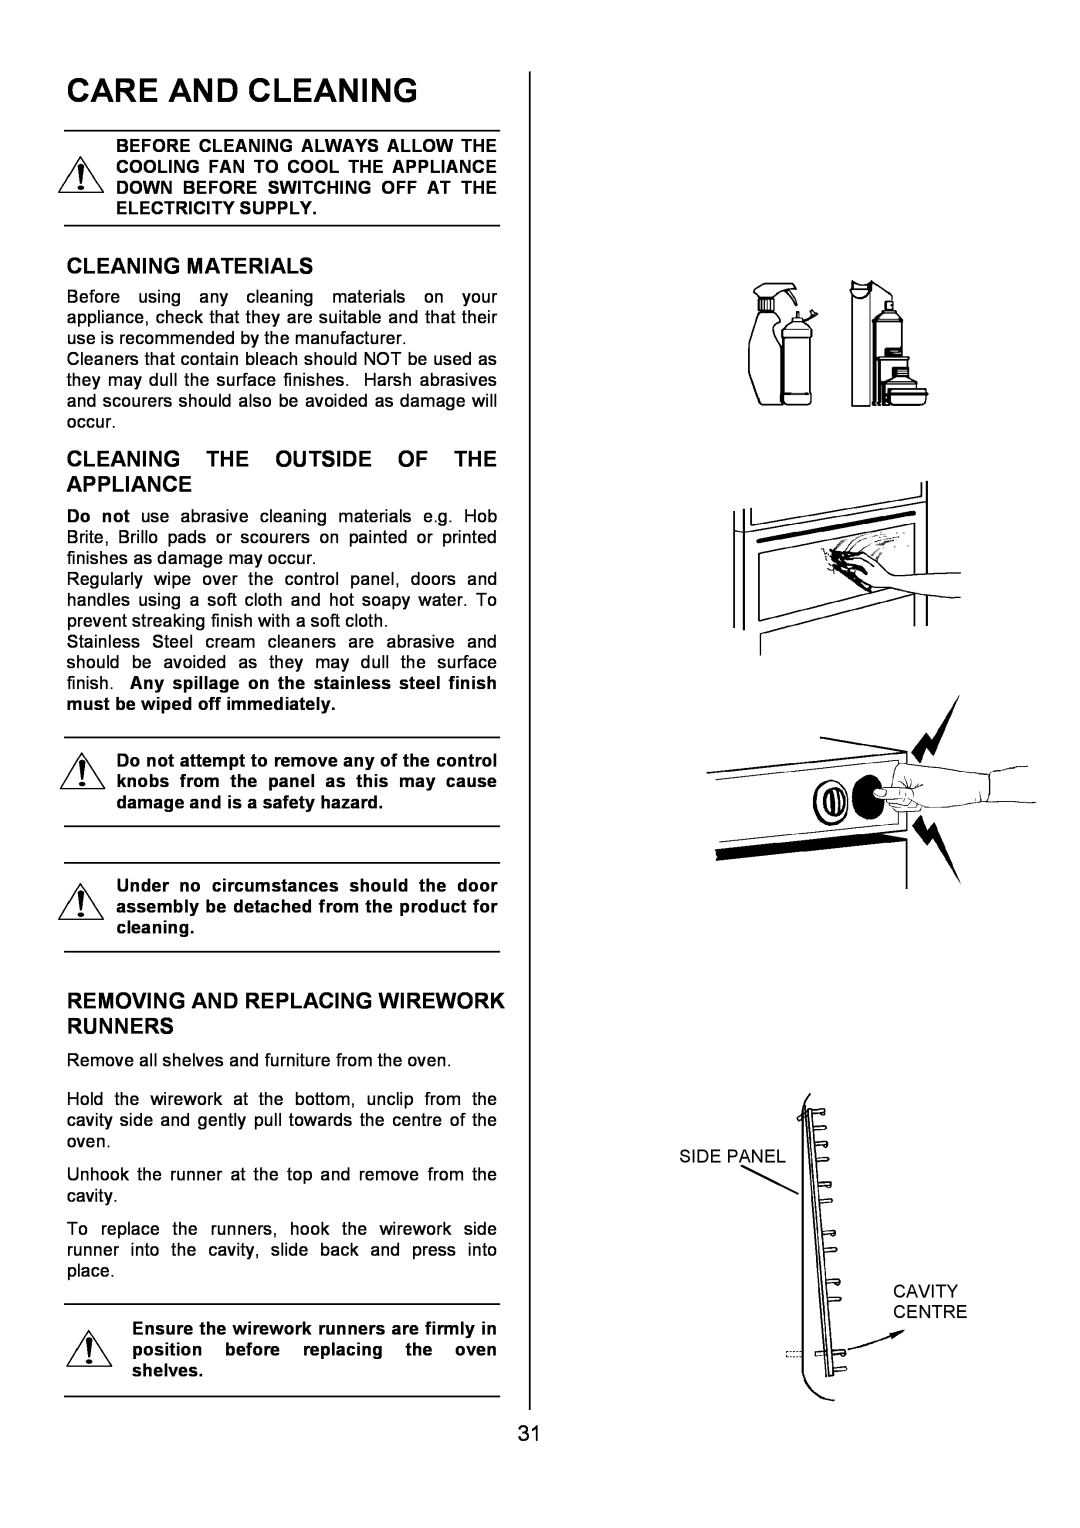 Electrolux D4101-4 operating instructions Care And Cleaning, Cleaning Materials, Cleaning The Outside Of The Appliance 